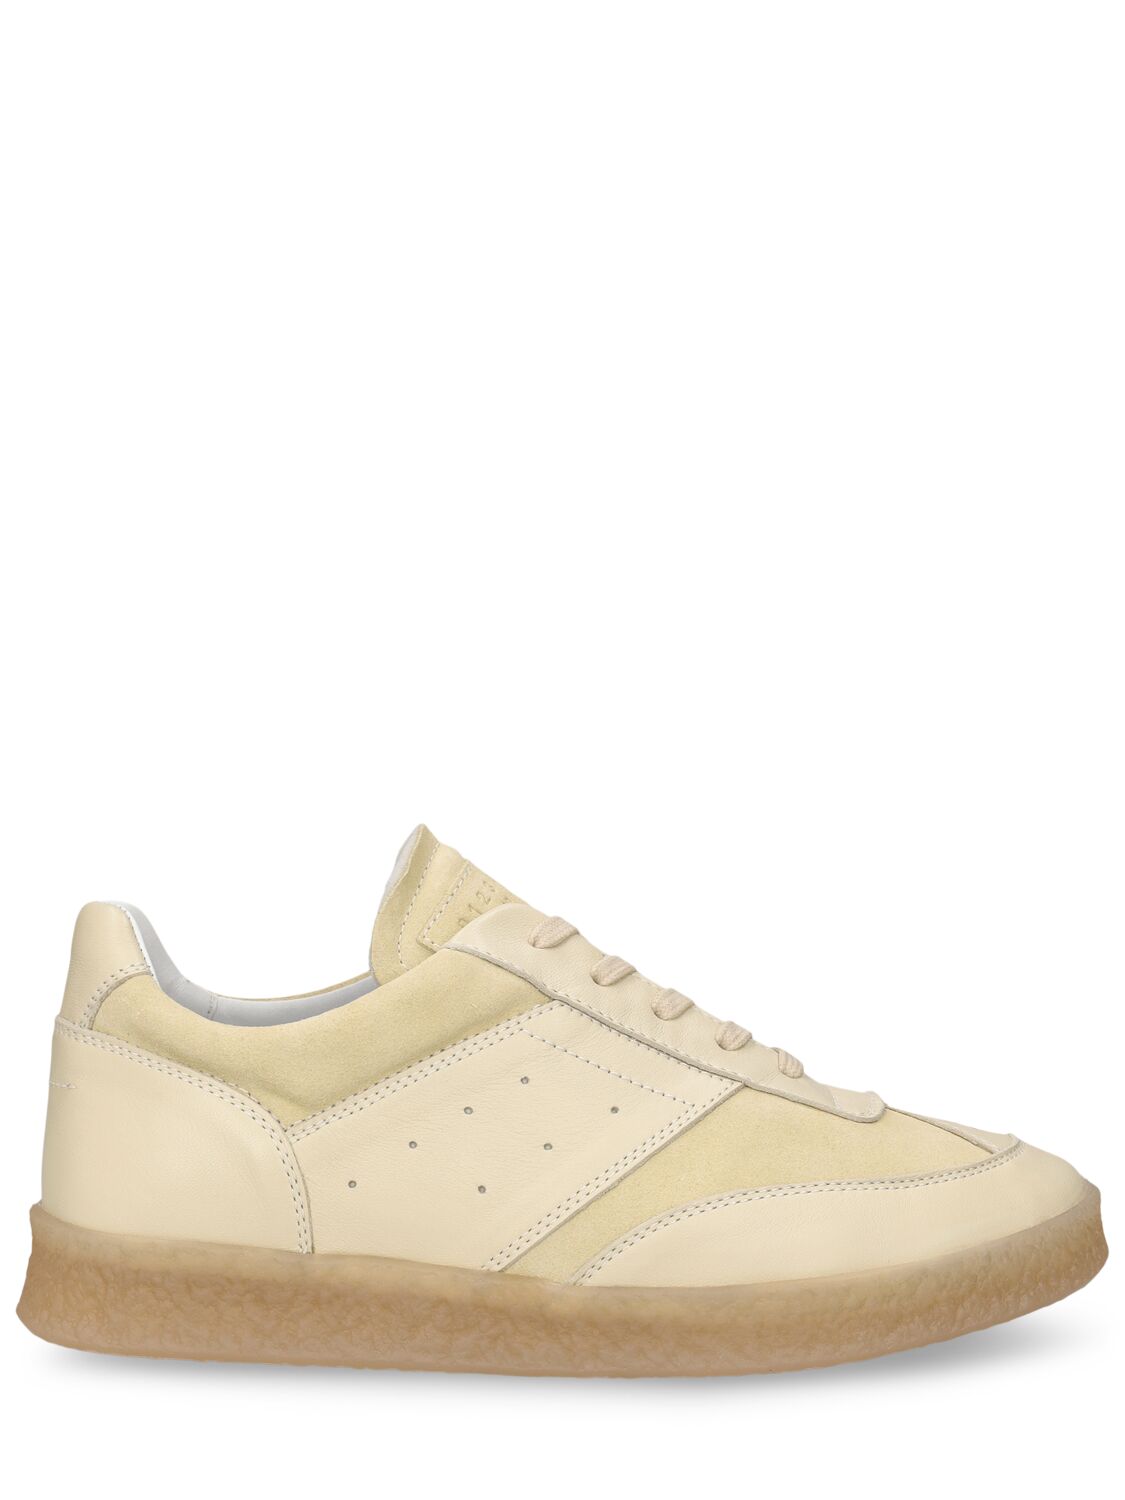 Mm6 Maison Margiela Leather Low Top Trainers In Beige